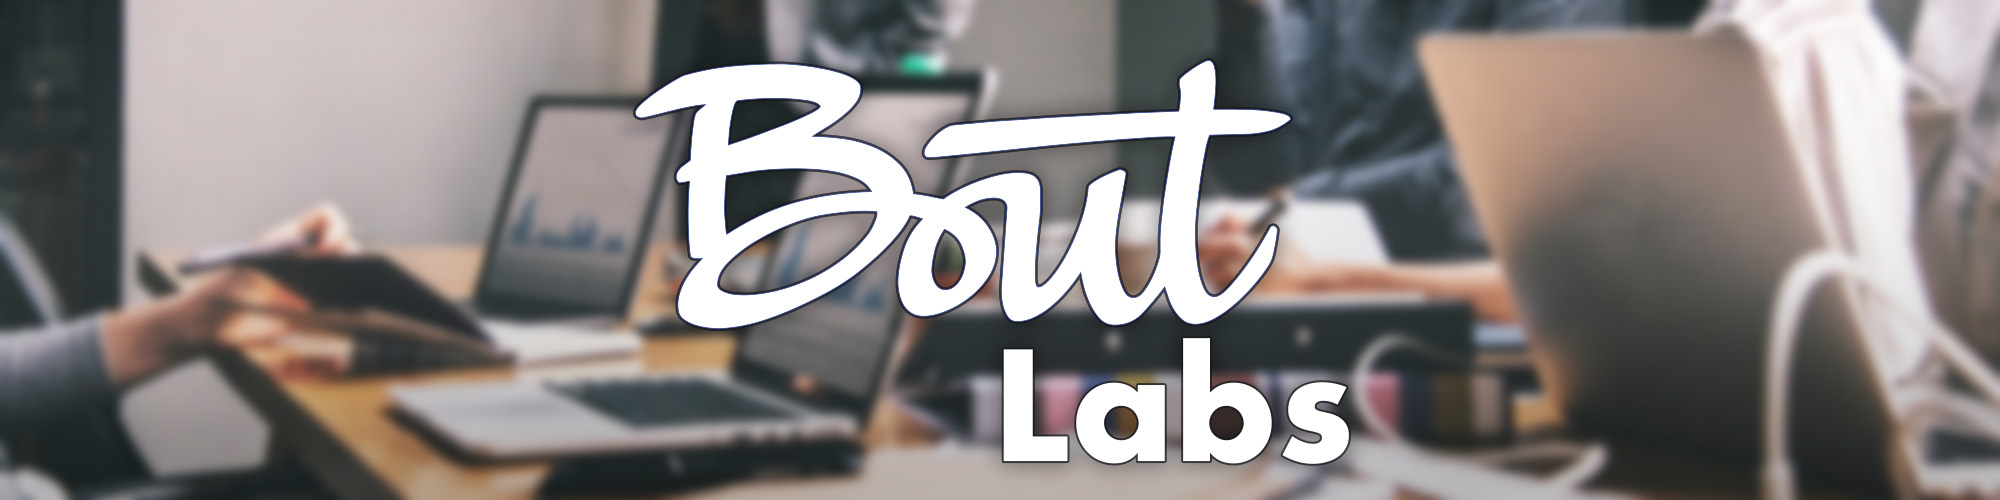 Bout Labs logo